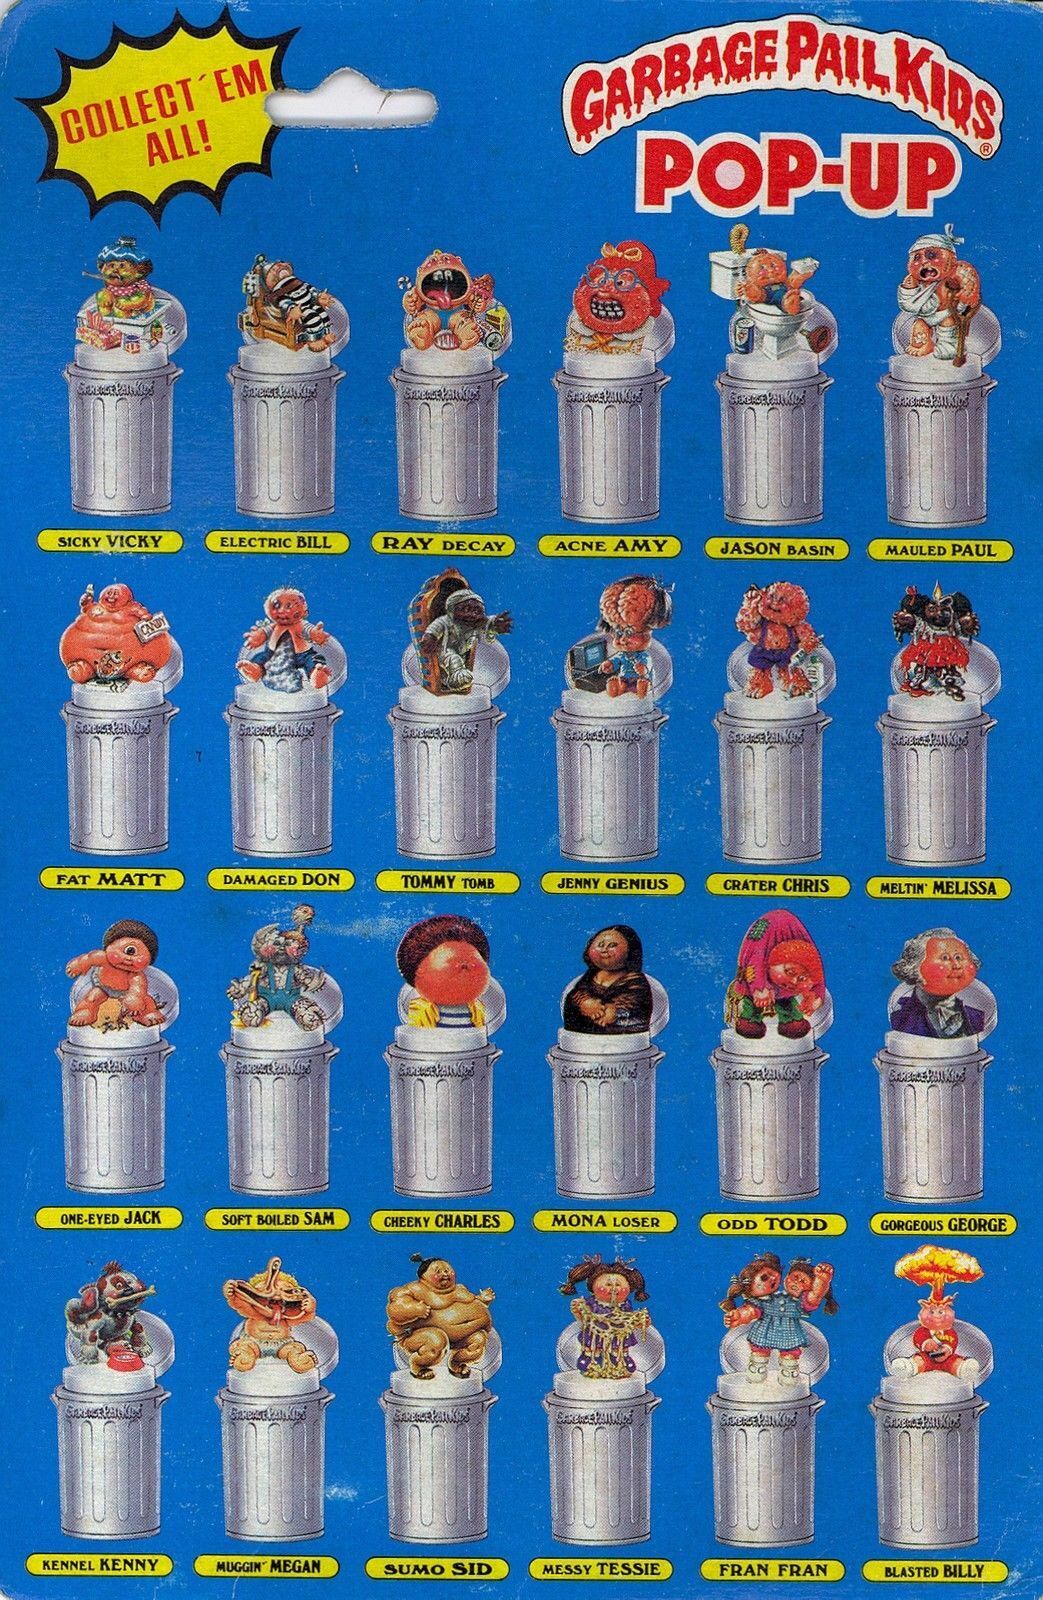 1985 Topps Imperial Toys GARBAGE PAIL KIDS AILIN AL Pop-Up GPK Image 2